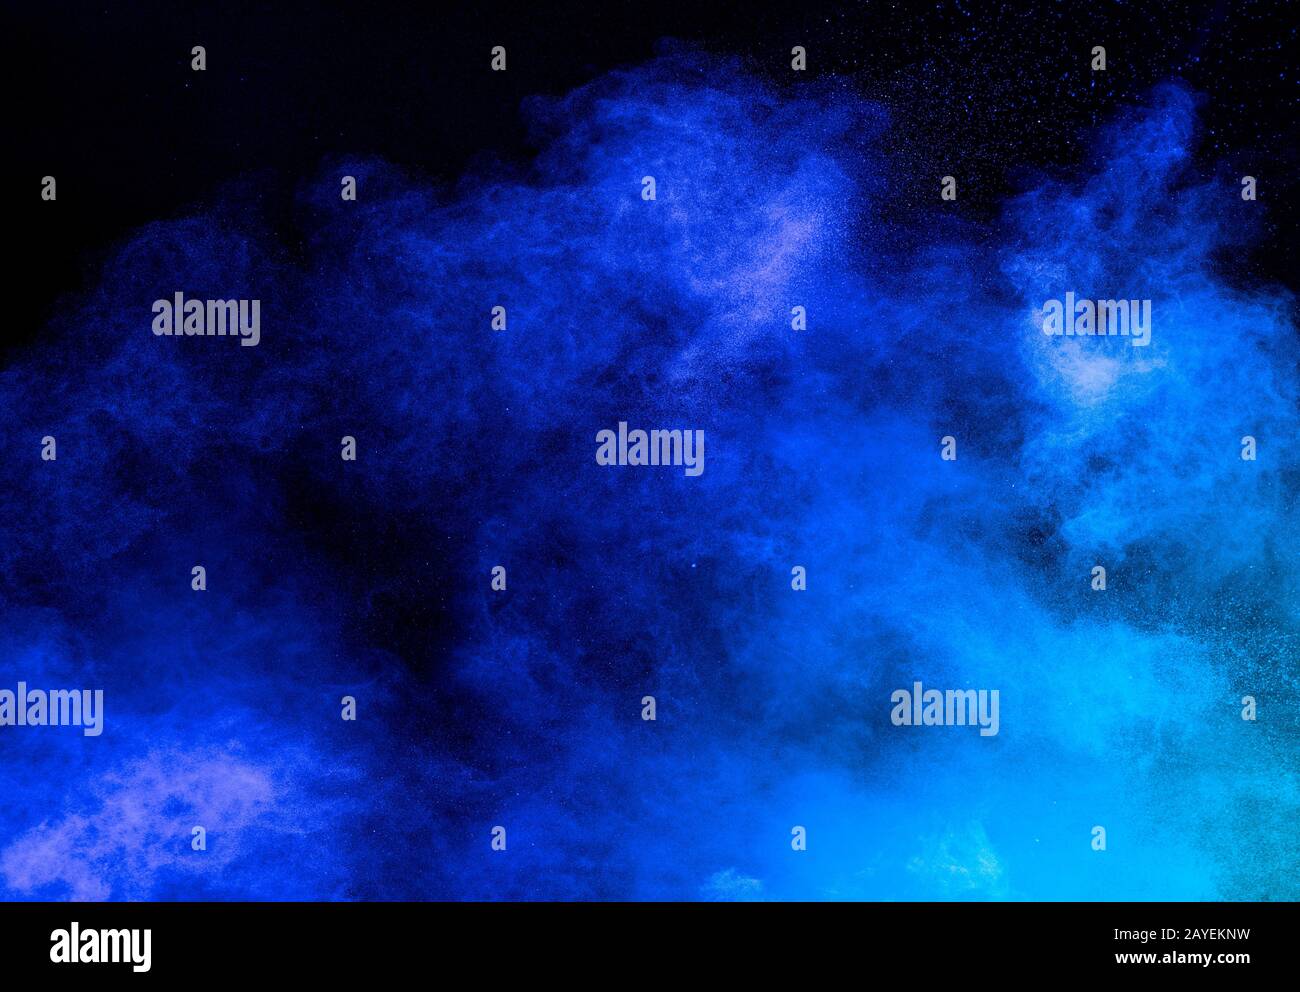 Blue color powder explosion on black background. Stock Photo